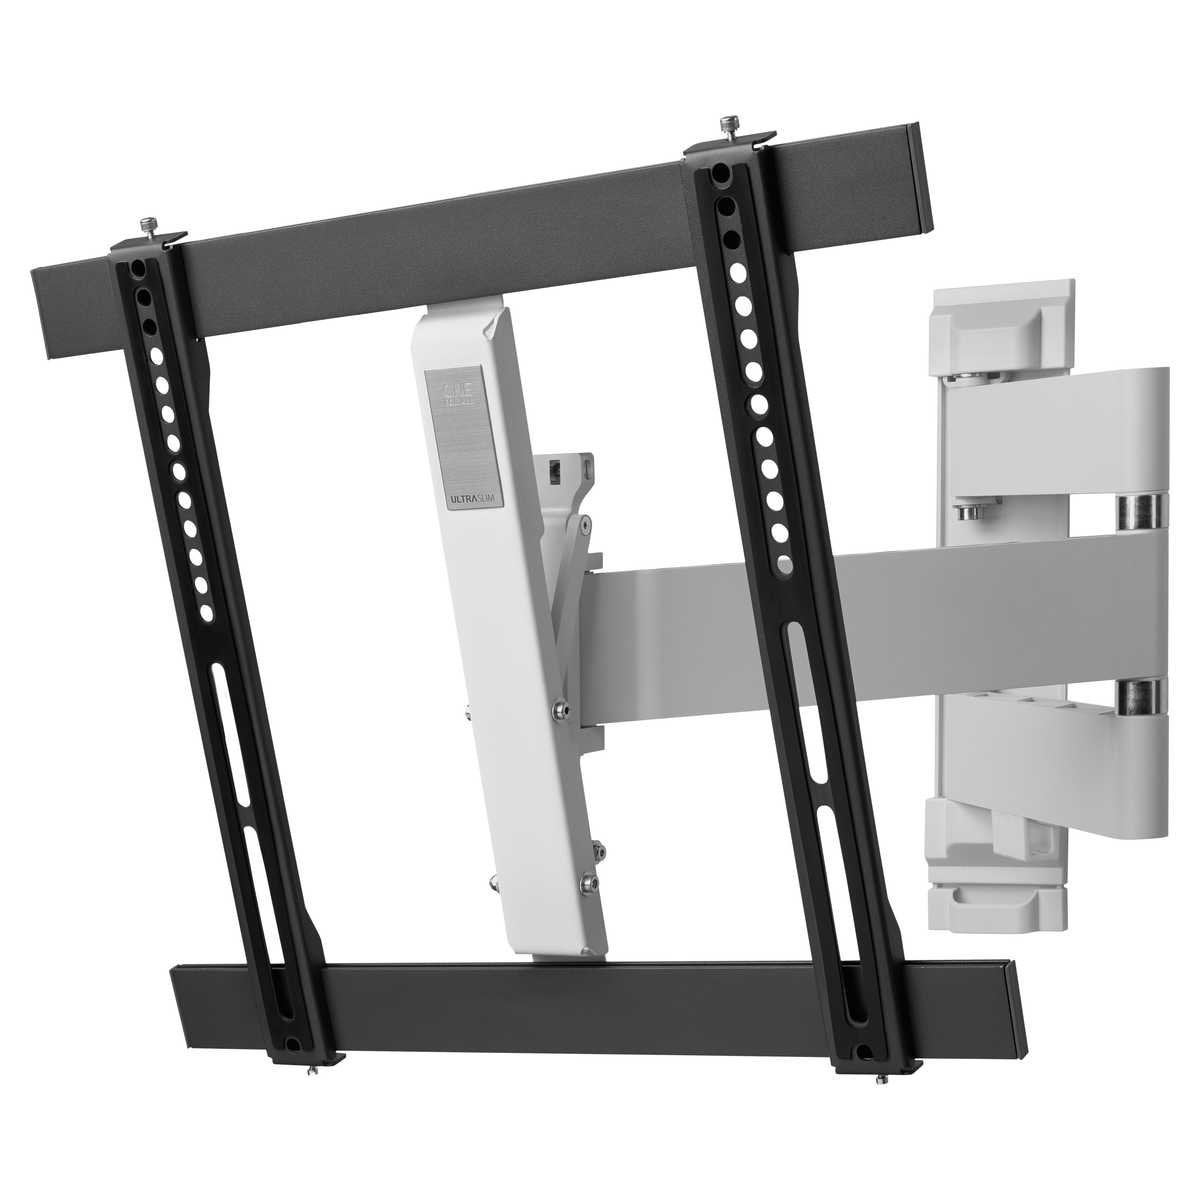 Image of One For All UE-WM6452 Ultra Slim Tilt and Turn Wall Mount for 32 to 65 Inch TVs